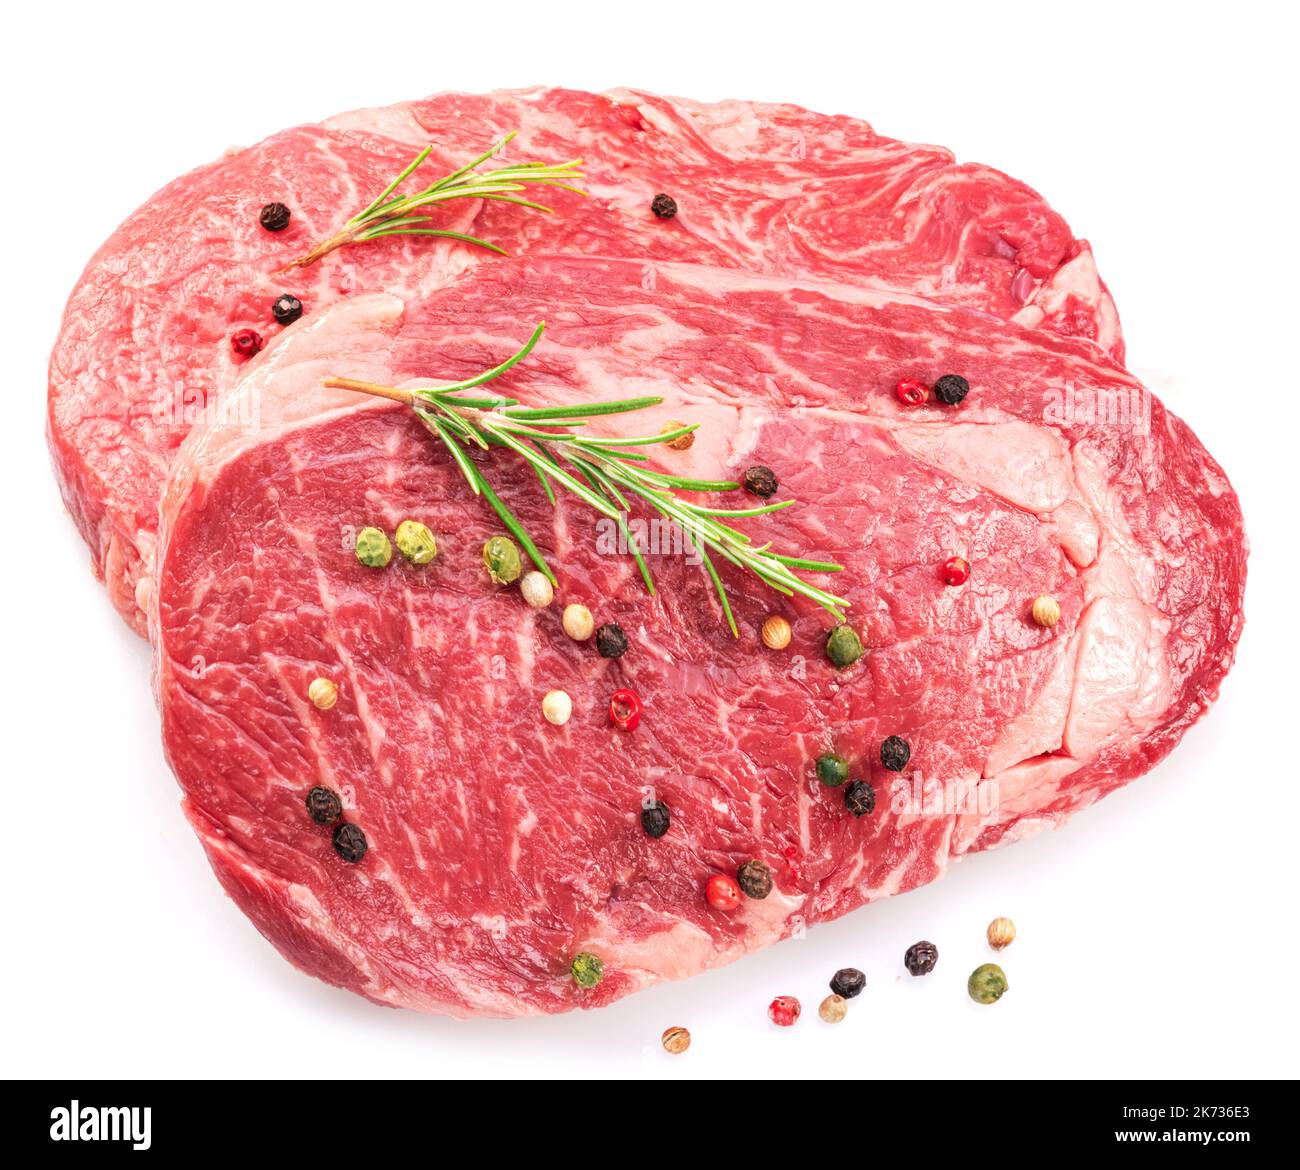 Raw ribeye steak with peppercorn and rosemary isolated on white background. Top view. Stock Photo